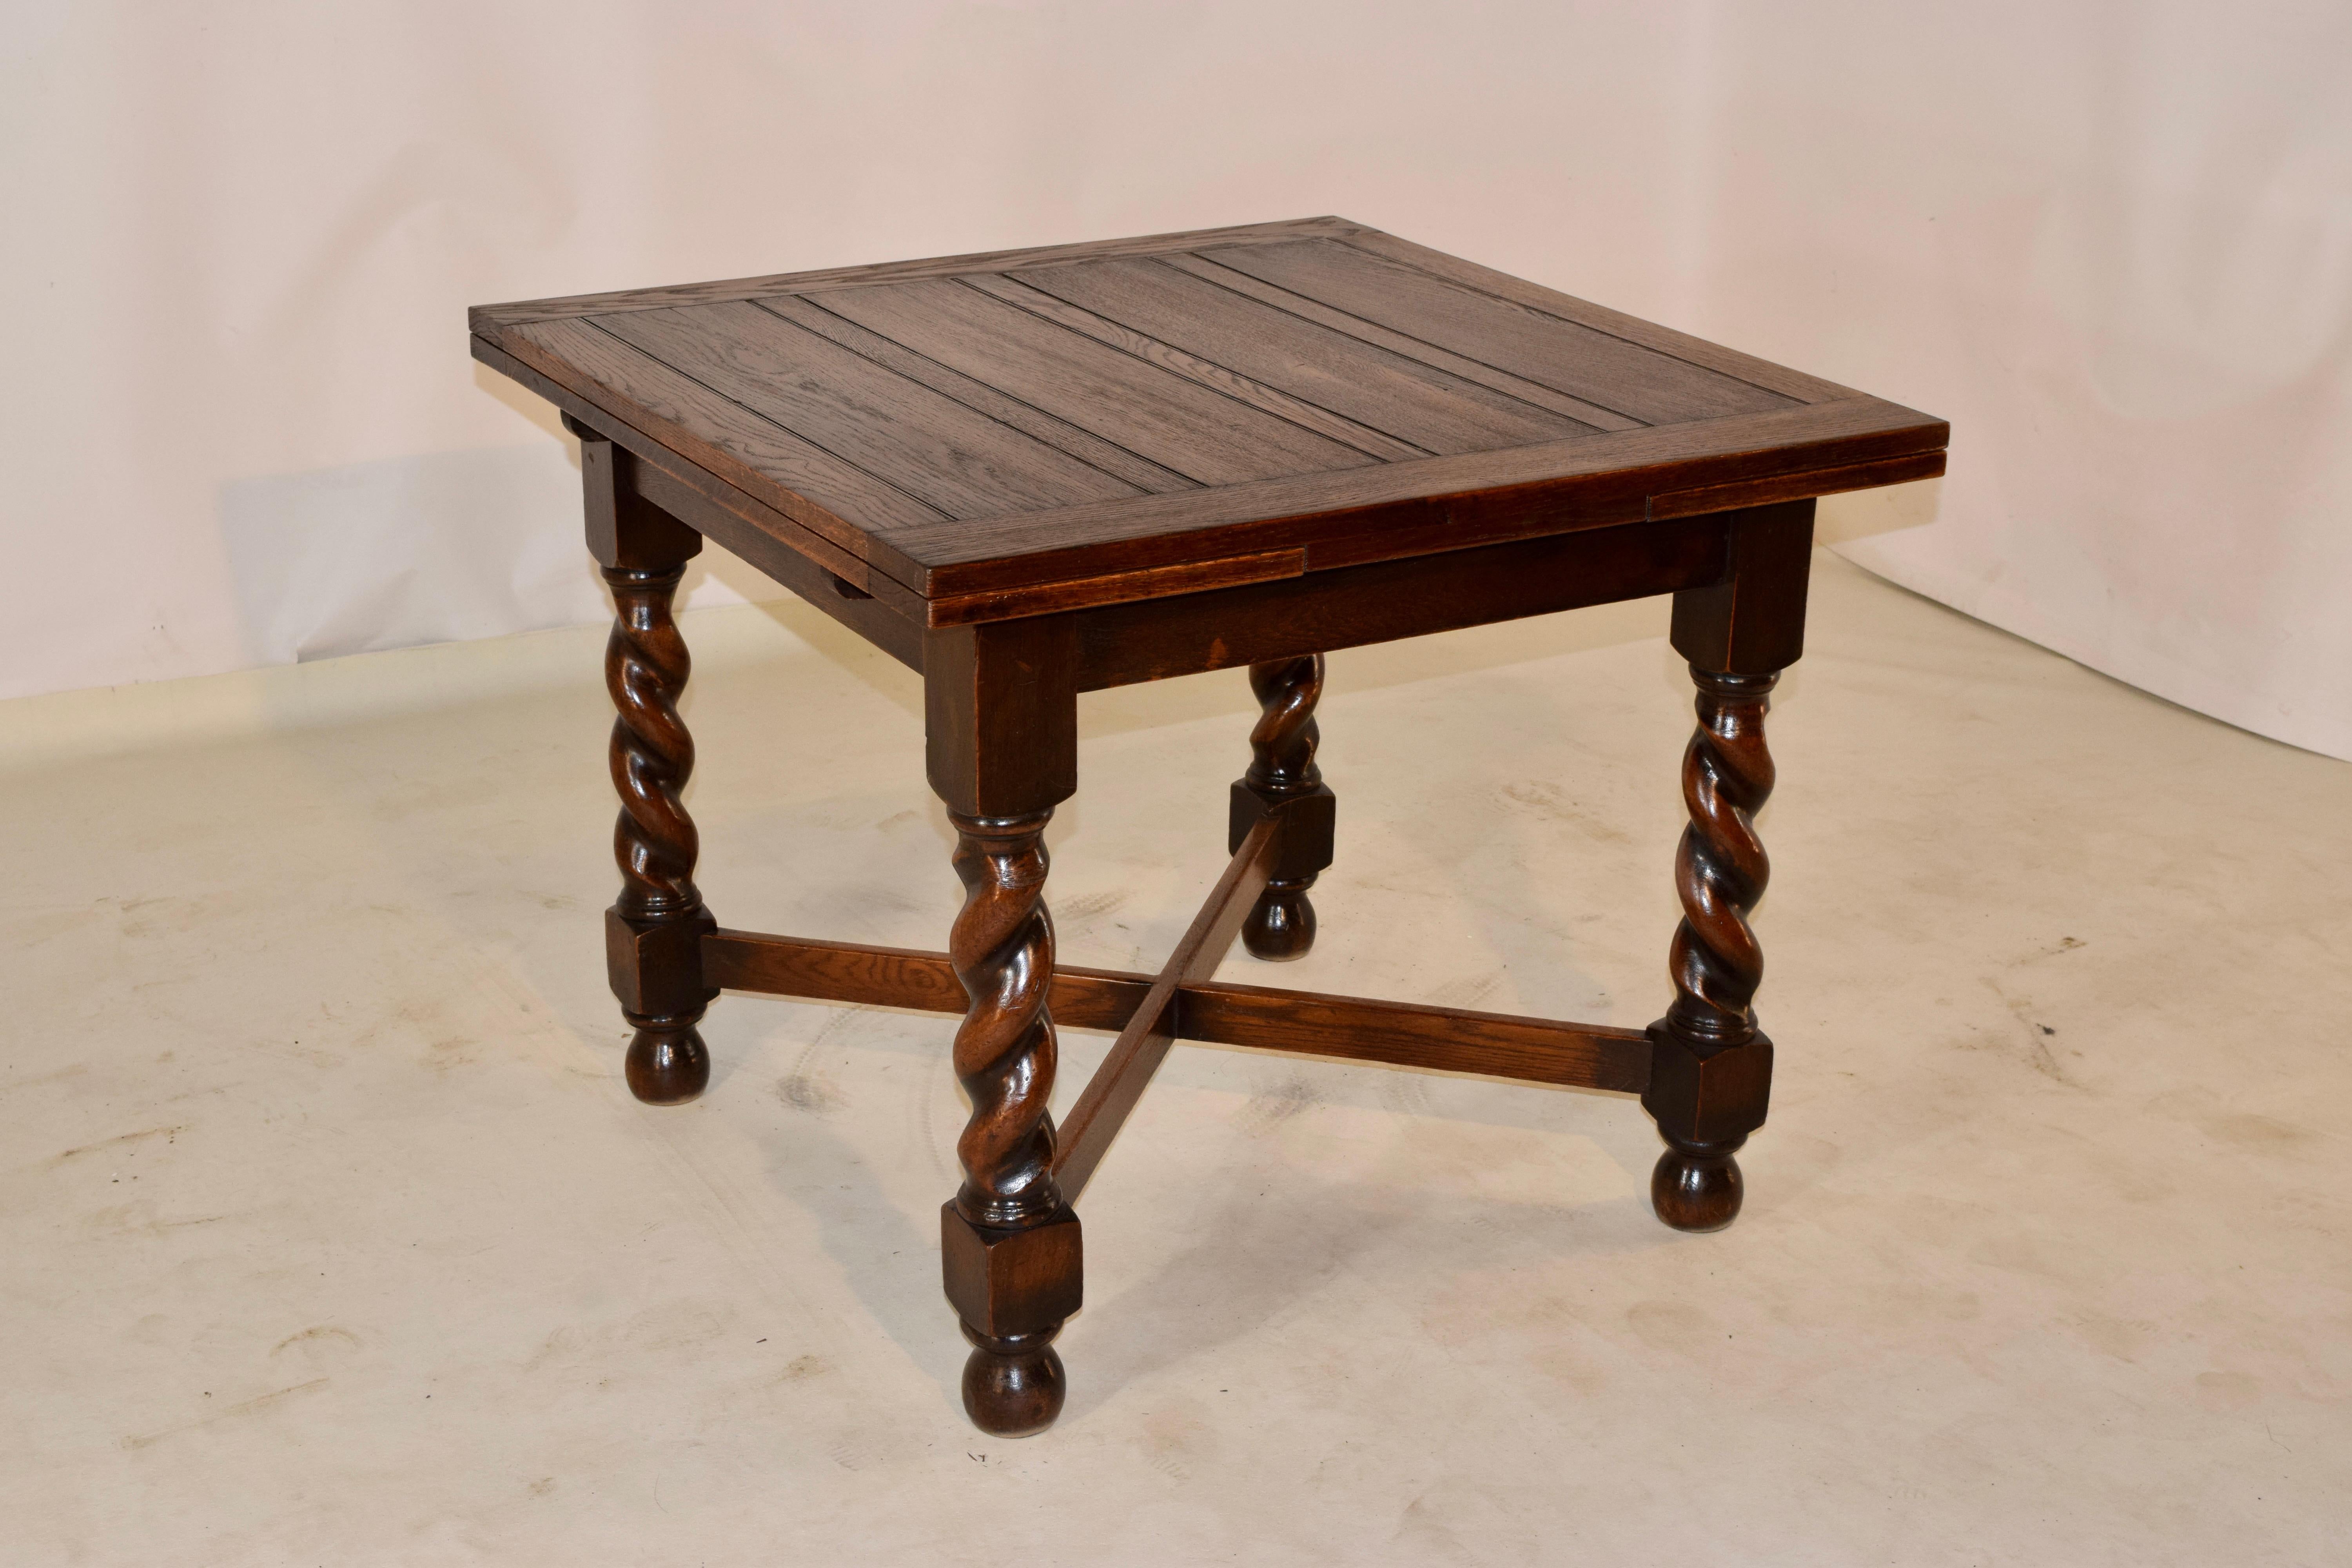 Late 19th century oak table from England with a paneled top and two leaves which draw out from the sides and tuck back in for easy storage. The table has a simple apron and is supported on hand turned barley twist legs, joined by cross stretchers